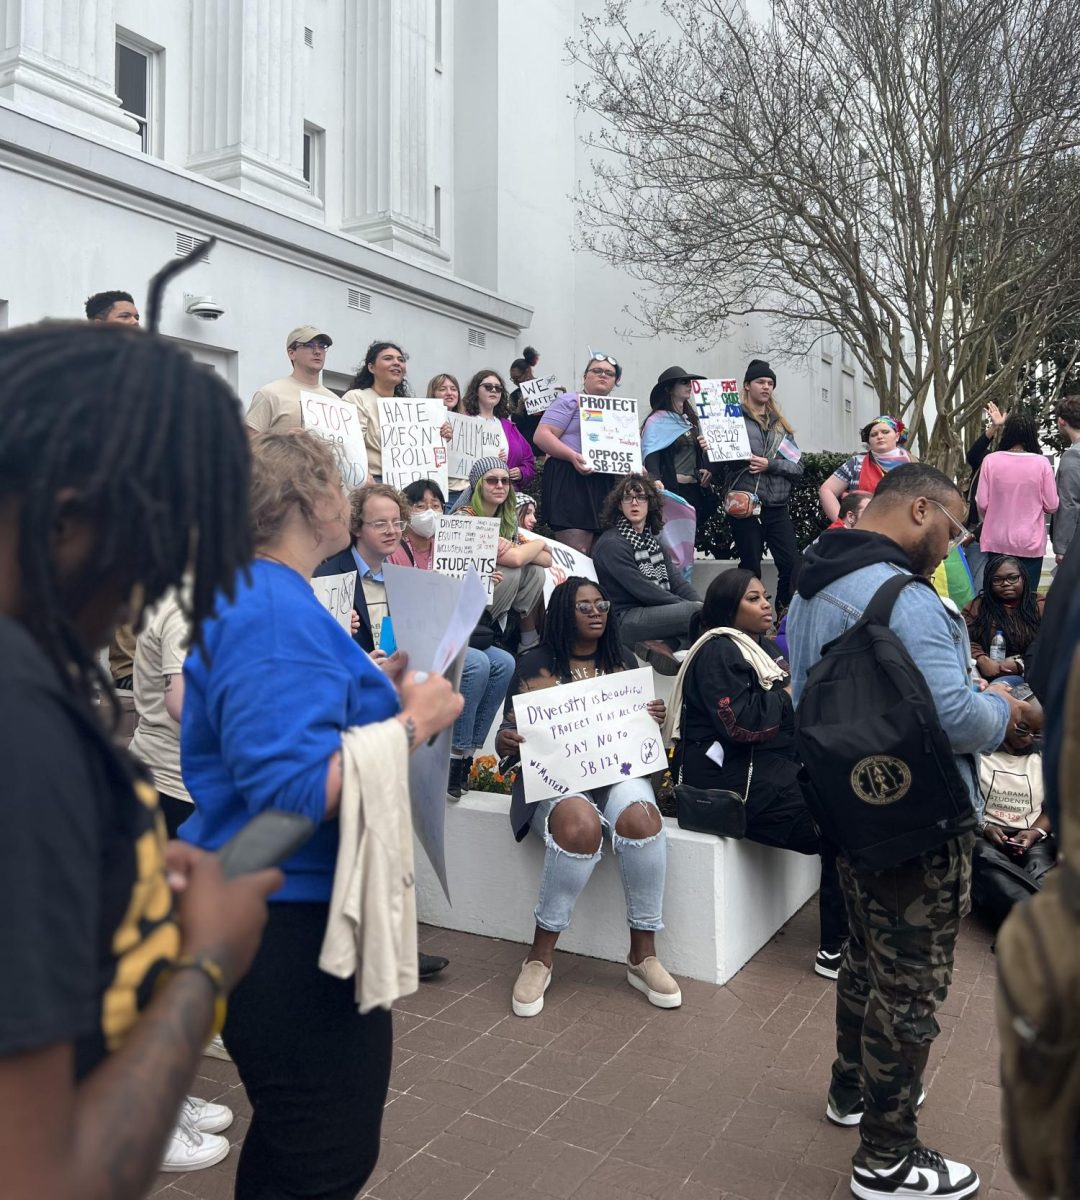 Students+demonstrate+against+SB+129+on+Wednesday+outside+the+Alabama+State+House+in+Montgomery.